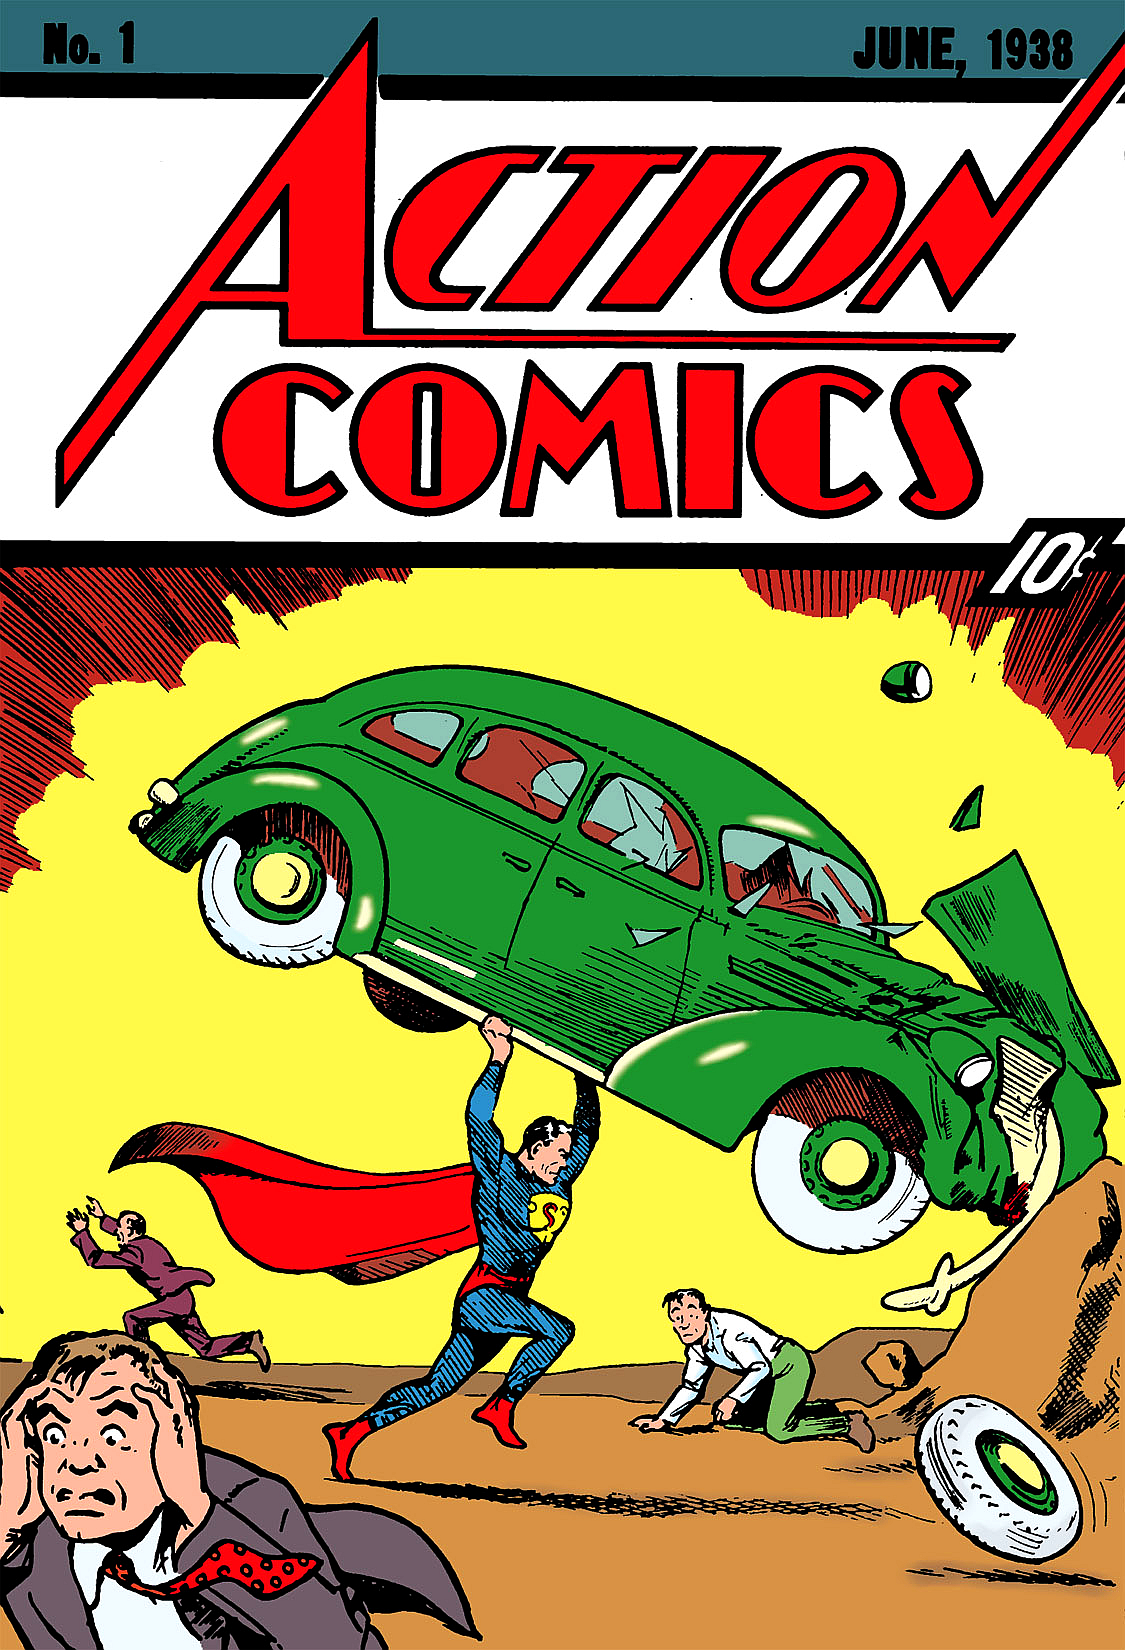 Action Comics #1 | Superheroes: From Comic Books to the Big Screen